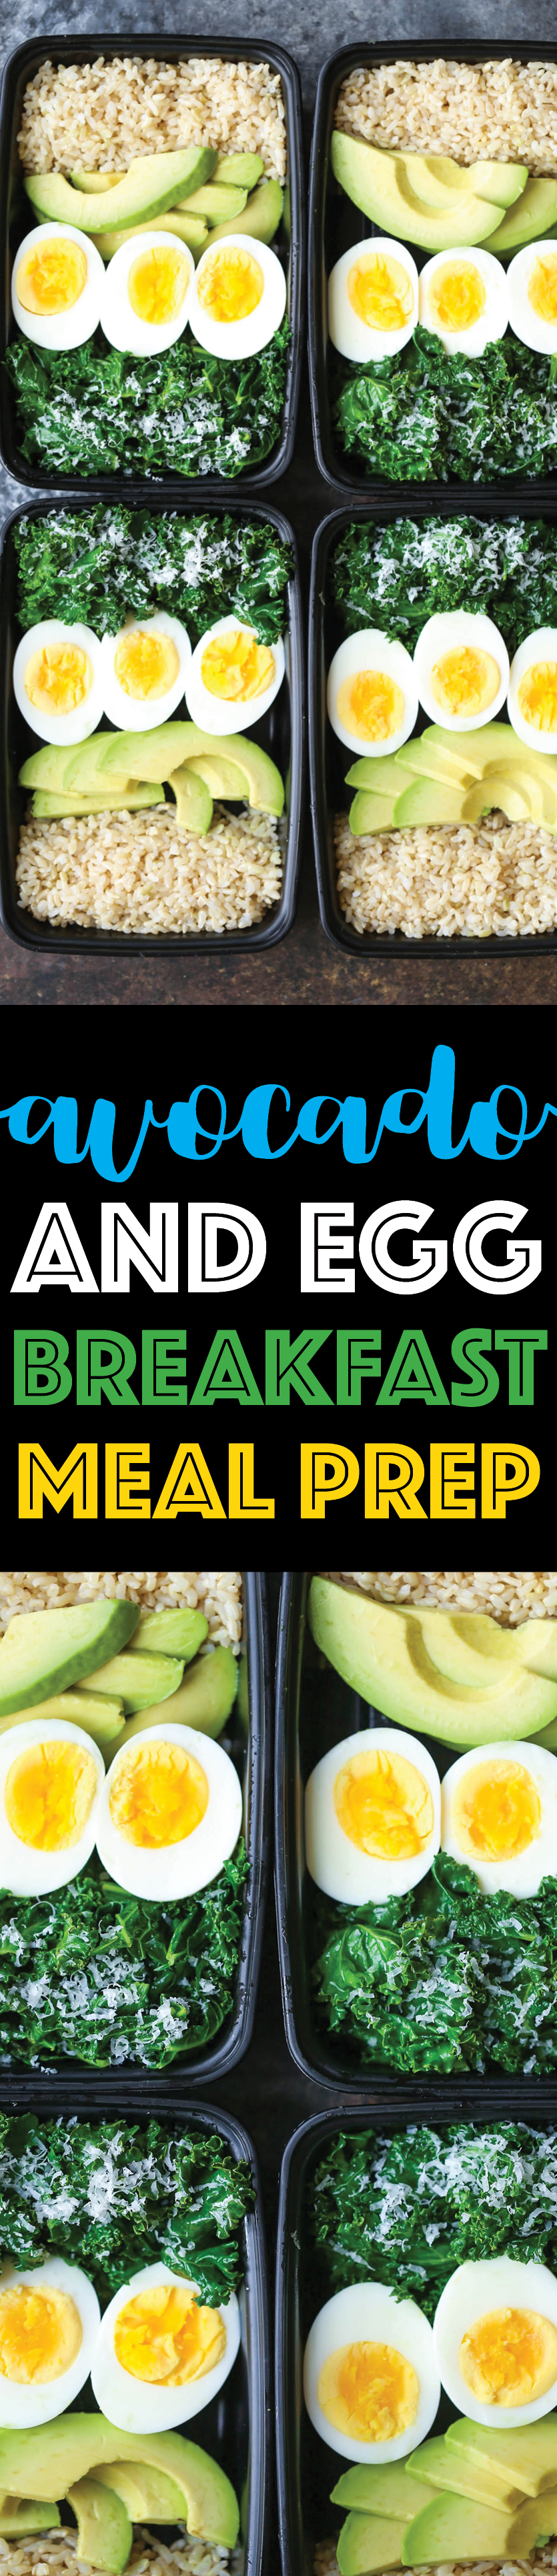 Avocado and Egg Breakfast Meal Prep - Jump start your mornings with the healthiest, filling breakfast ever! Loaded with brown rice, avocado, eggs and kale.